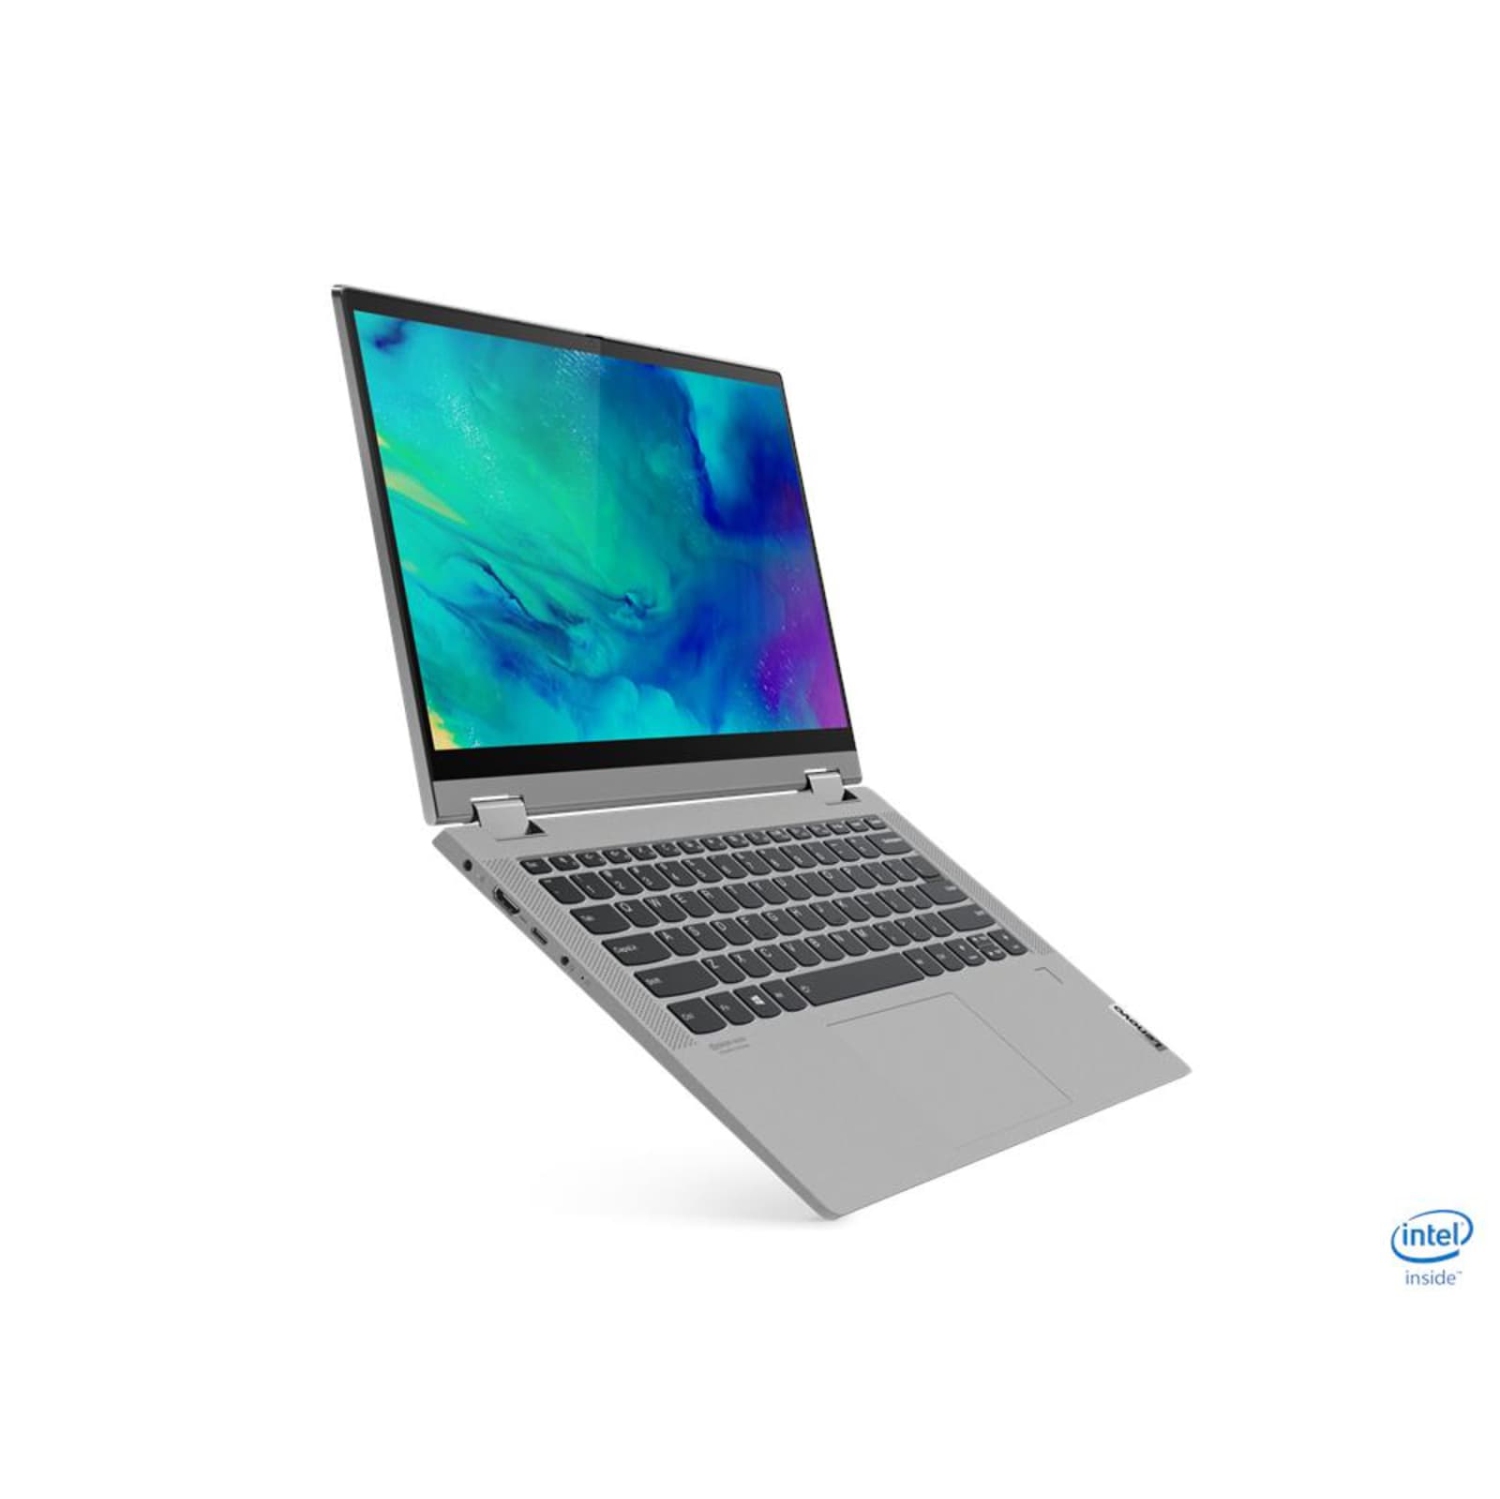 Refurbished (Excellent) Lenovo IdeaPad Flex 5 14ITL05 2-in-1 Laptop | 14" 1920x1080 FHD | Core i3-1115G4 - 1TB SSD Hard Drive - 4GB RAM | 2 cores @ 4.1 GHz Win 11 Home Silver